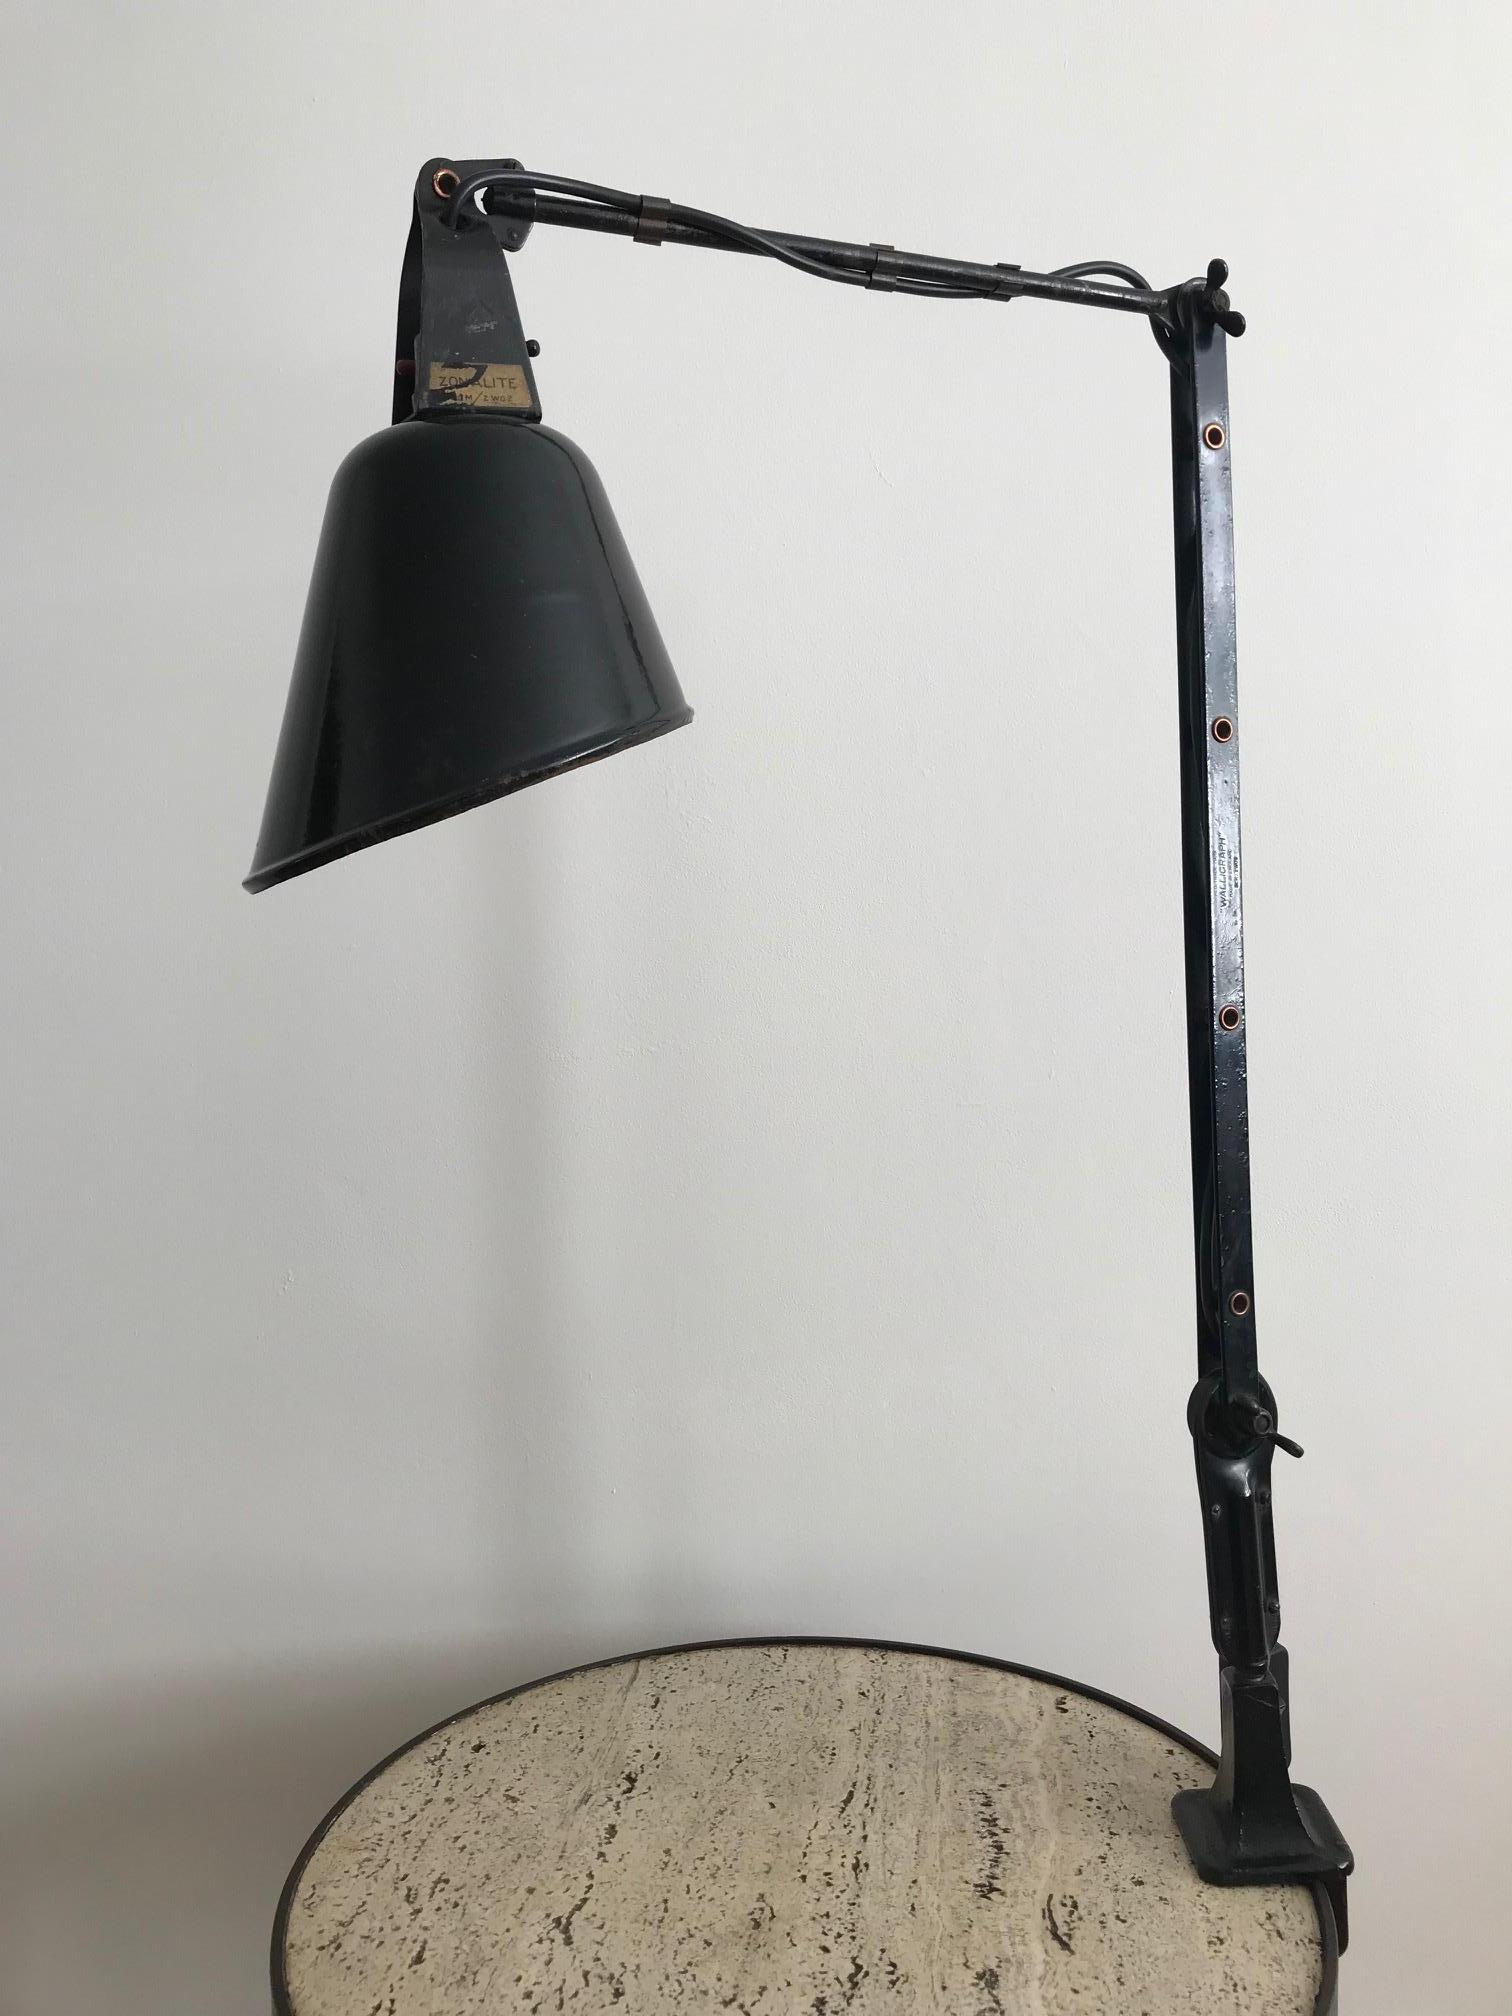 A very good example of a 1930s English Zonalite Walligraph Angle poise desk lamp. All original with just a few rust marks on the rim of the shade. The enamel and paint are original. The light fixes onto the desk by tightening the clamp and is easily